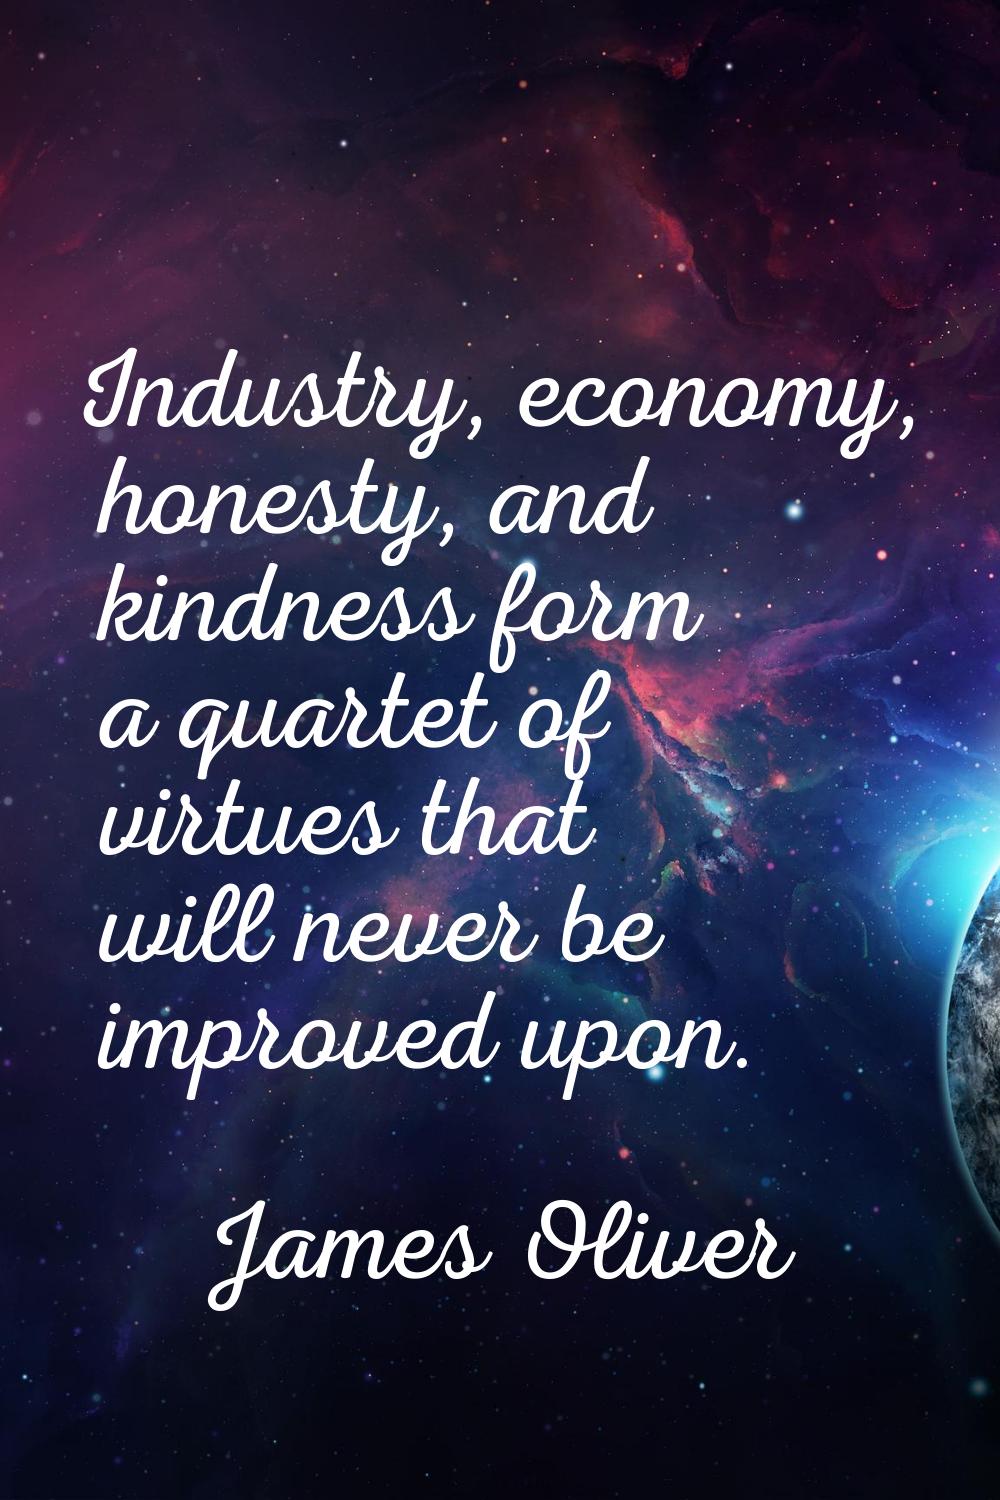 Industry, economy, honesty, and kindness form a quartet of virtues that will never be improved upon